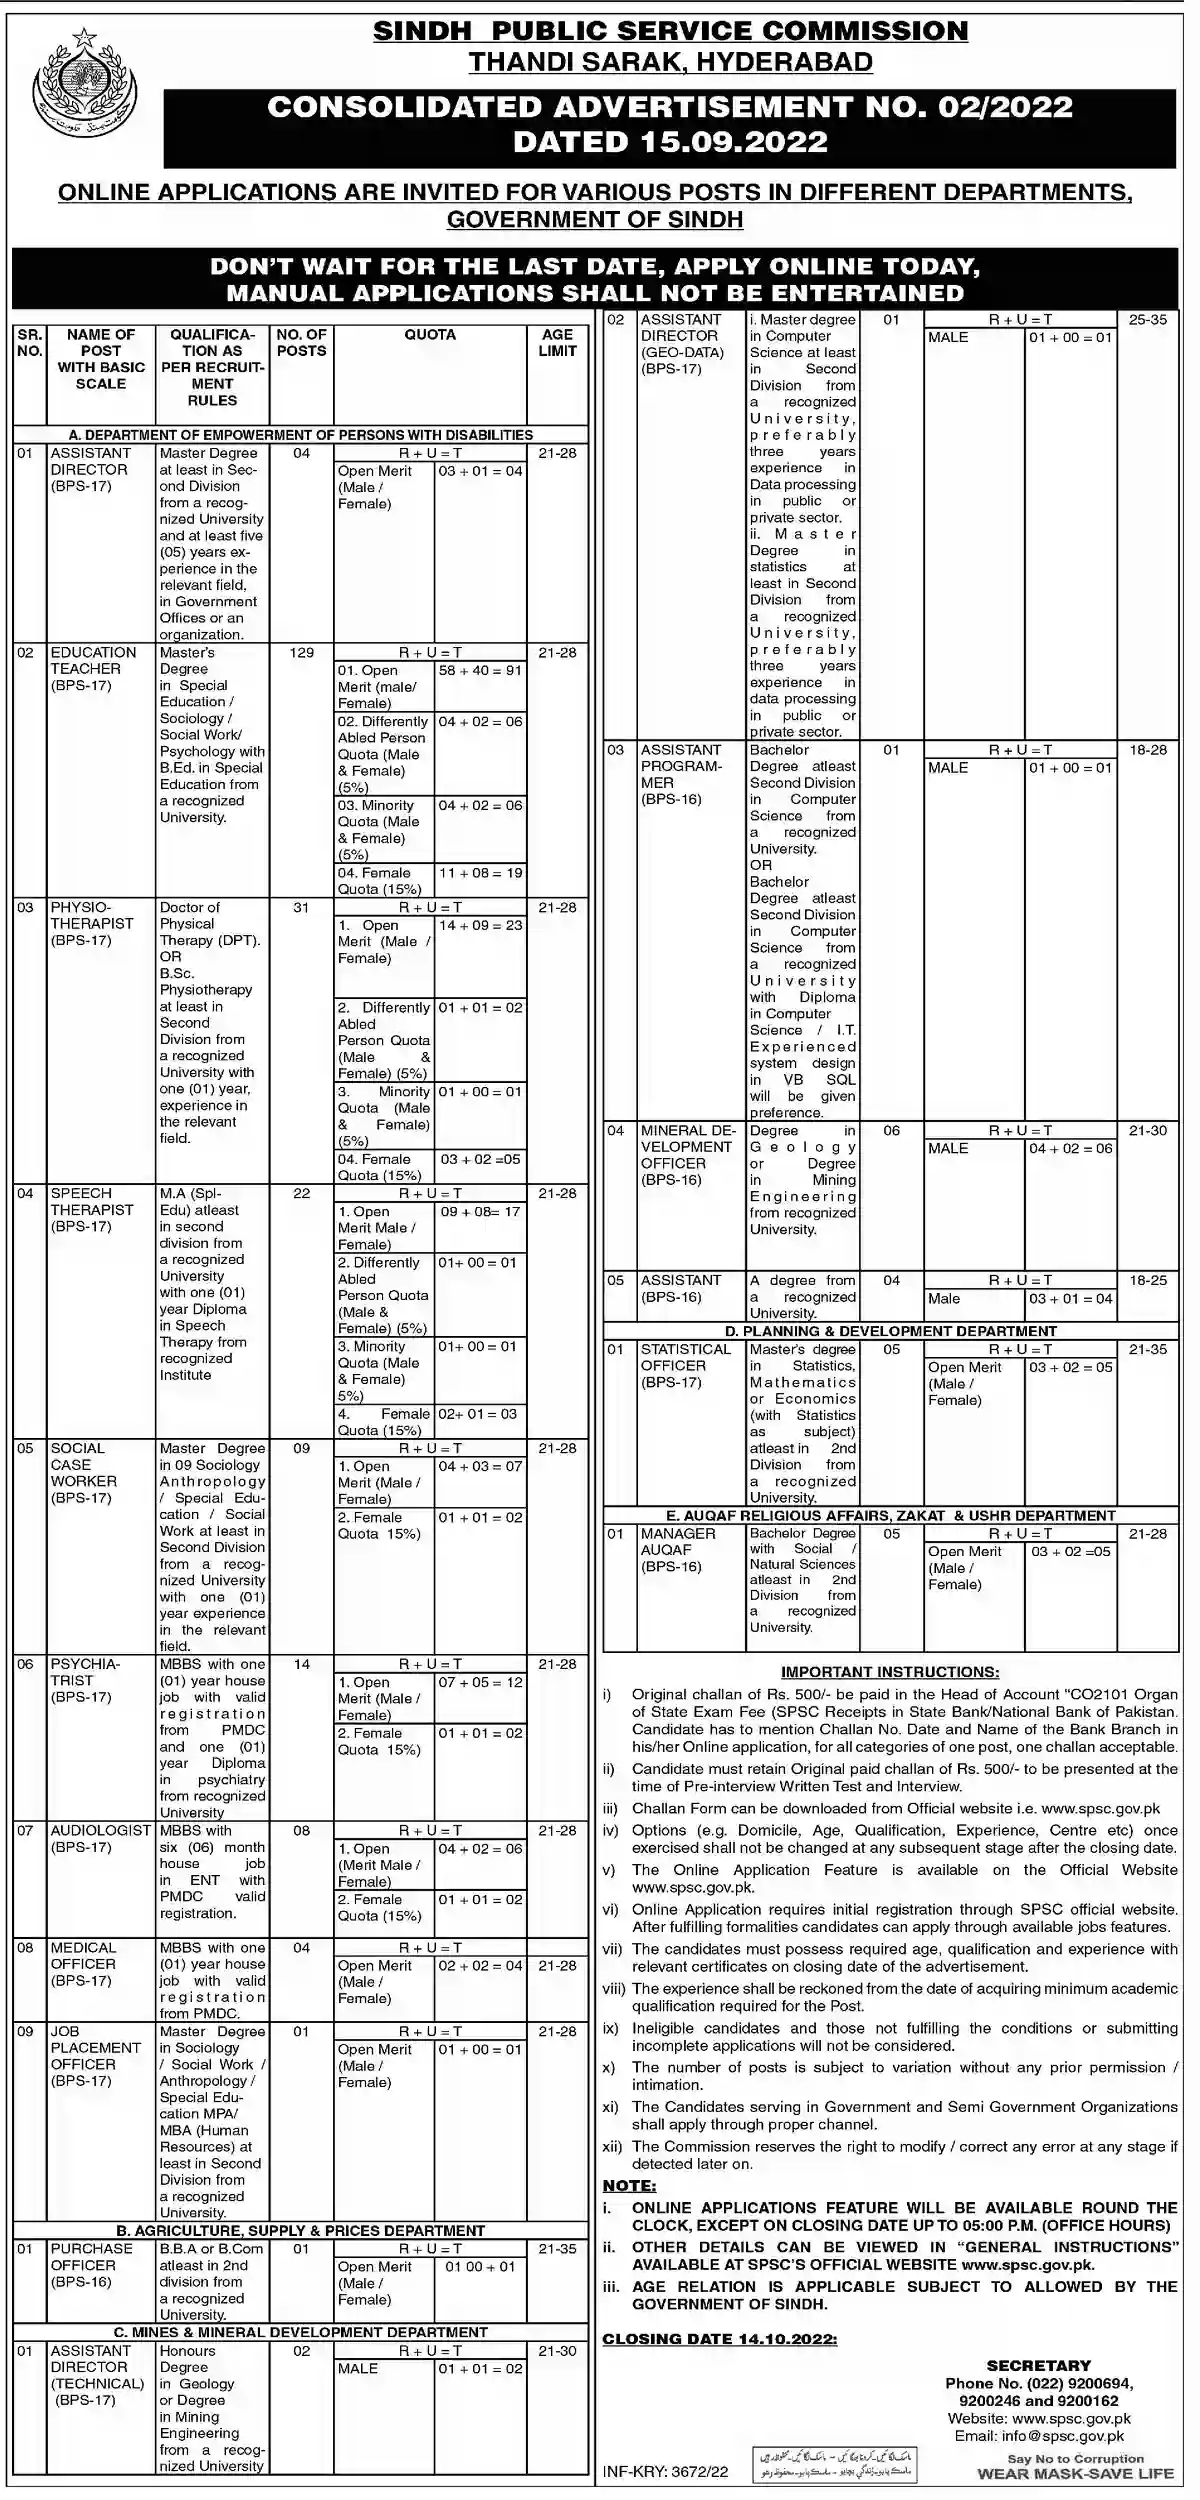 SPSC Jobs 2022 Consolidated Advertisement No 2/2022 Apply Online